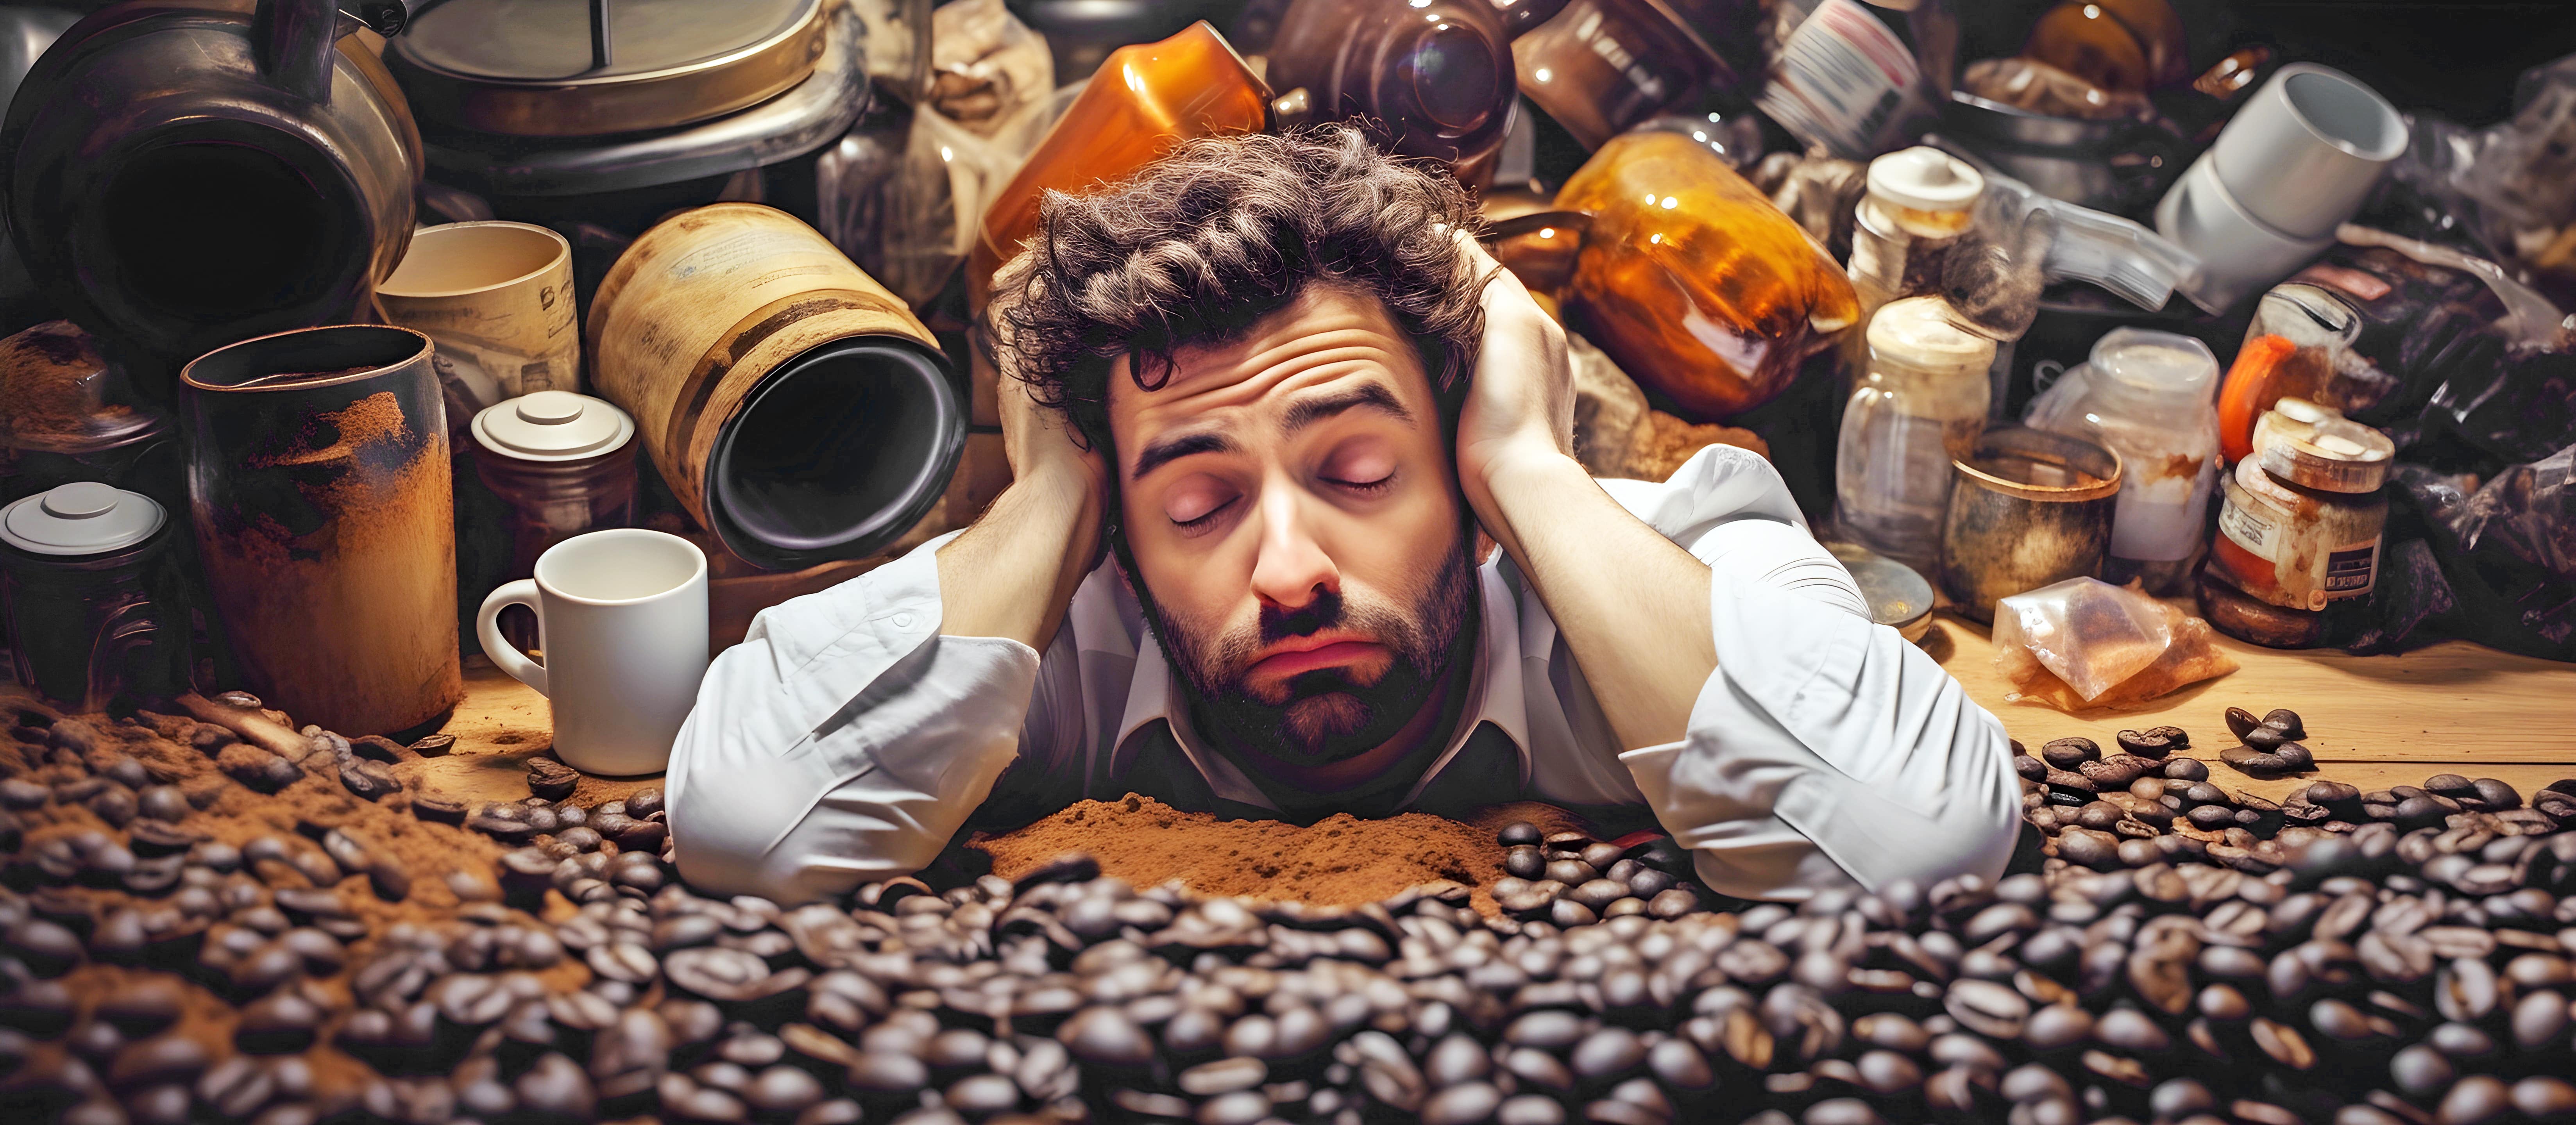 A man propped up on his elbows with his eyes closed surrounded by coffee paraphernalia and beans